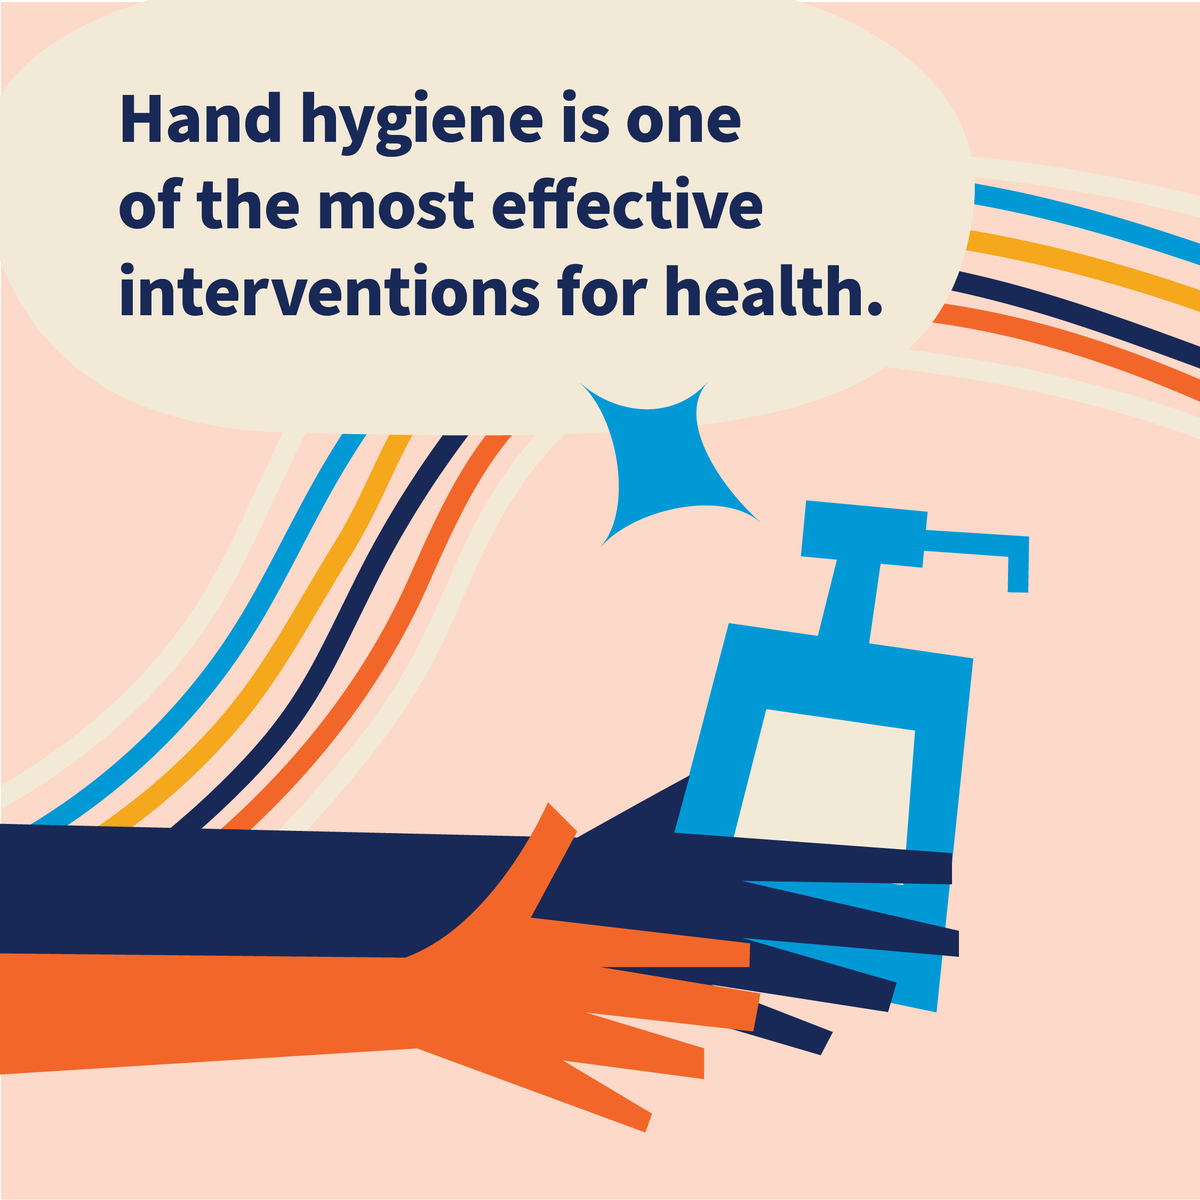 #DYK by 2050, infections resistant to AMR 💊 will be responsible for 10M deaths each year? Handwashing isn't just a simple act—it's a powerful defense in our battle to keep antibiotics 💊 working. Join us in the fight to save lives. 💪 fdiworlddental.org/preventing-amr…